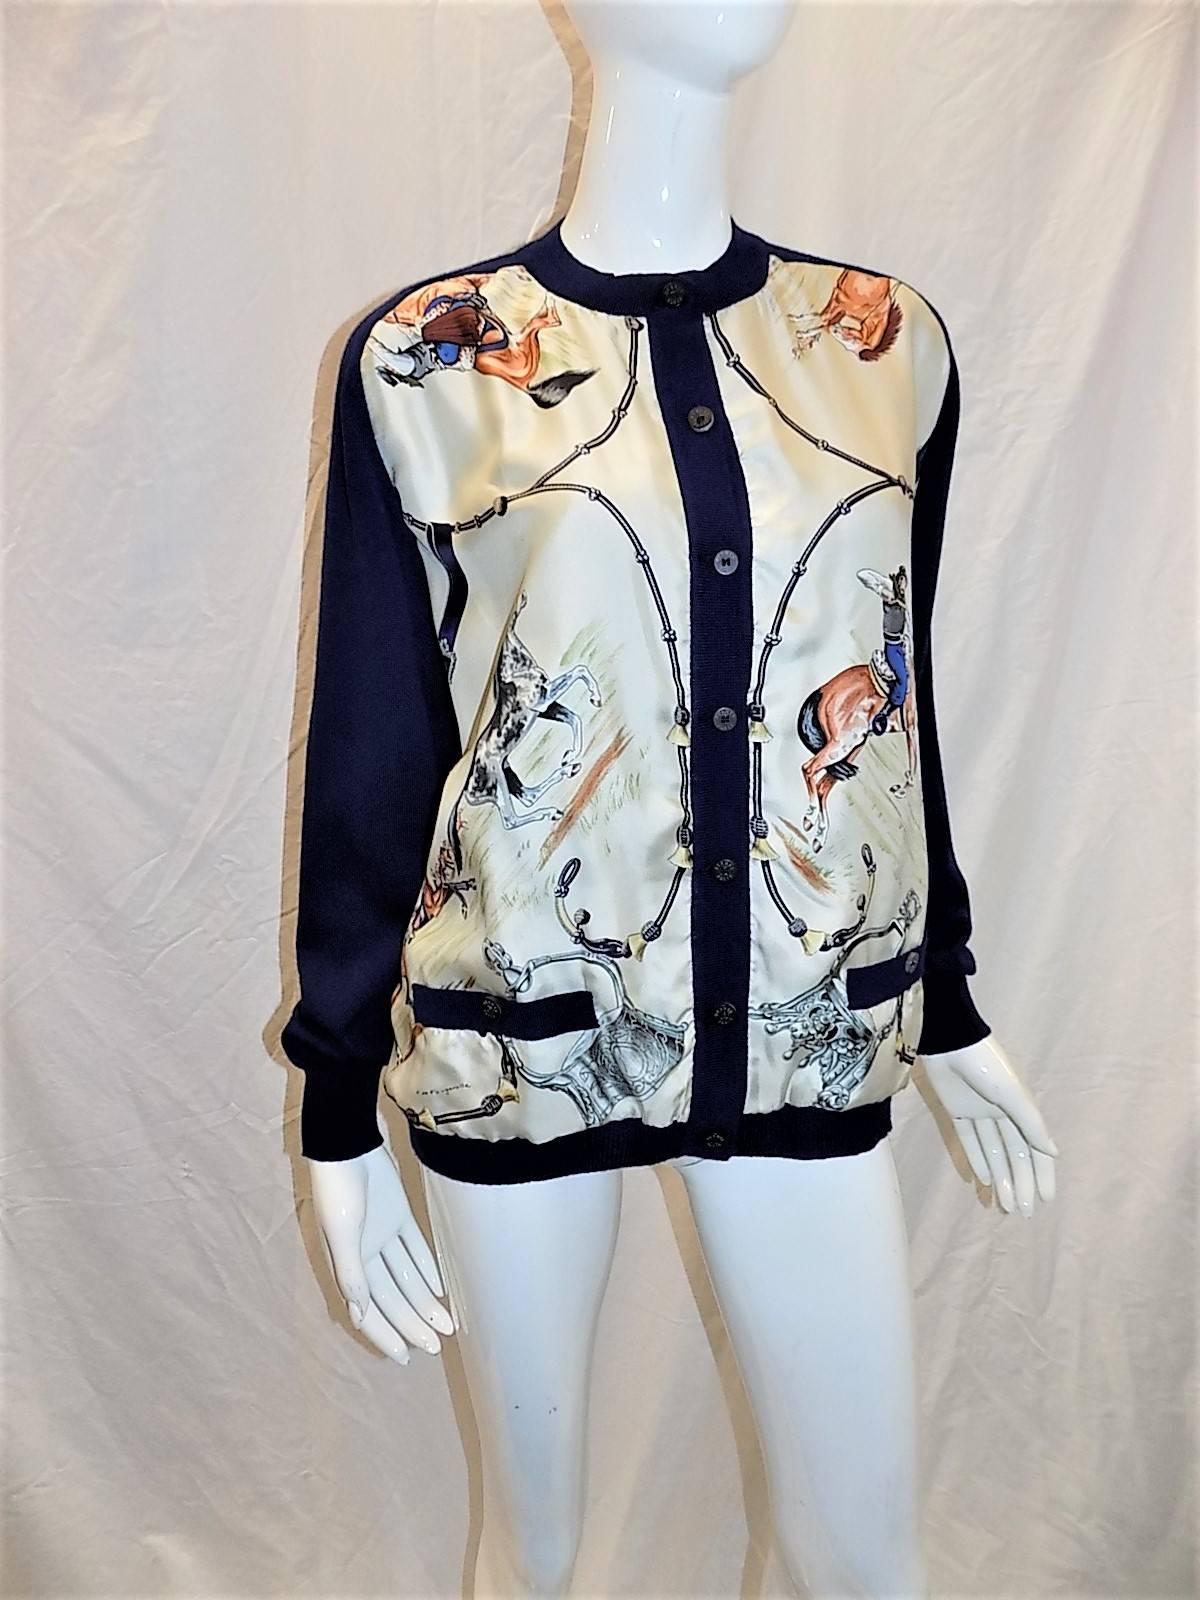 Navy Hermes vintage equestrian cardigan sweater by artist  J De Fougerolle.  Horn engraved buttons  100% lite wool and 100% silk . Size 46  bust 50